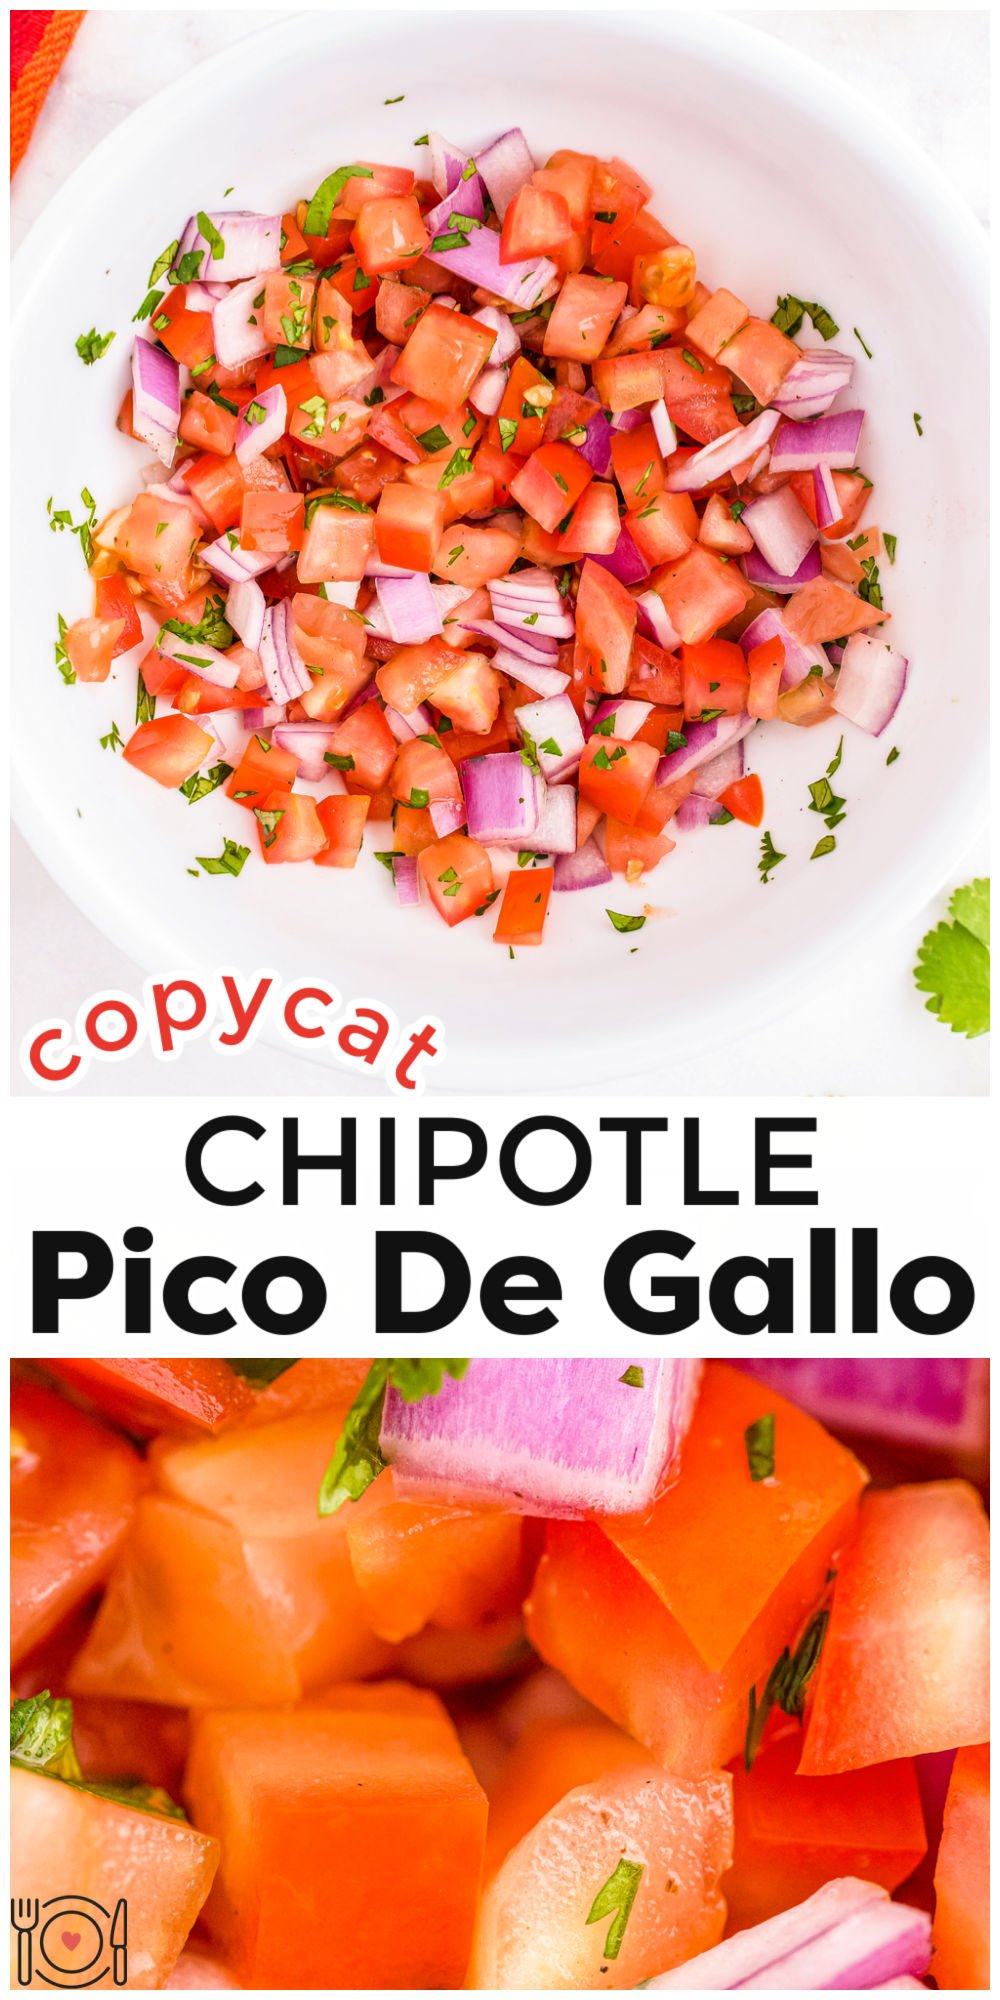 This Chipotle Pico De Gallo Copycat recipe is simple to make and calls for just six ingredients. It’s great on its own or served with your favorite Mexican dishes. via @foodfolksandfun